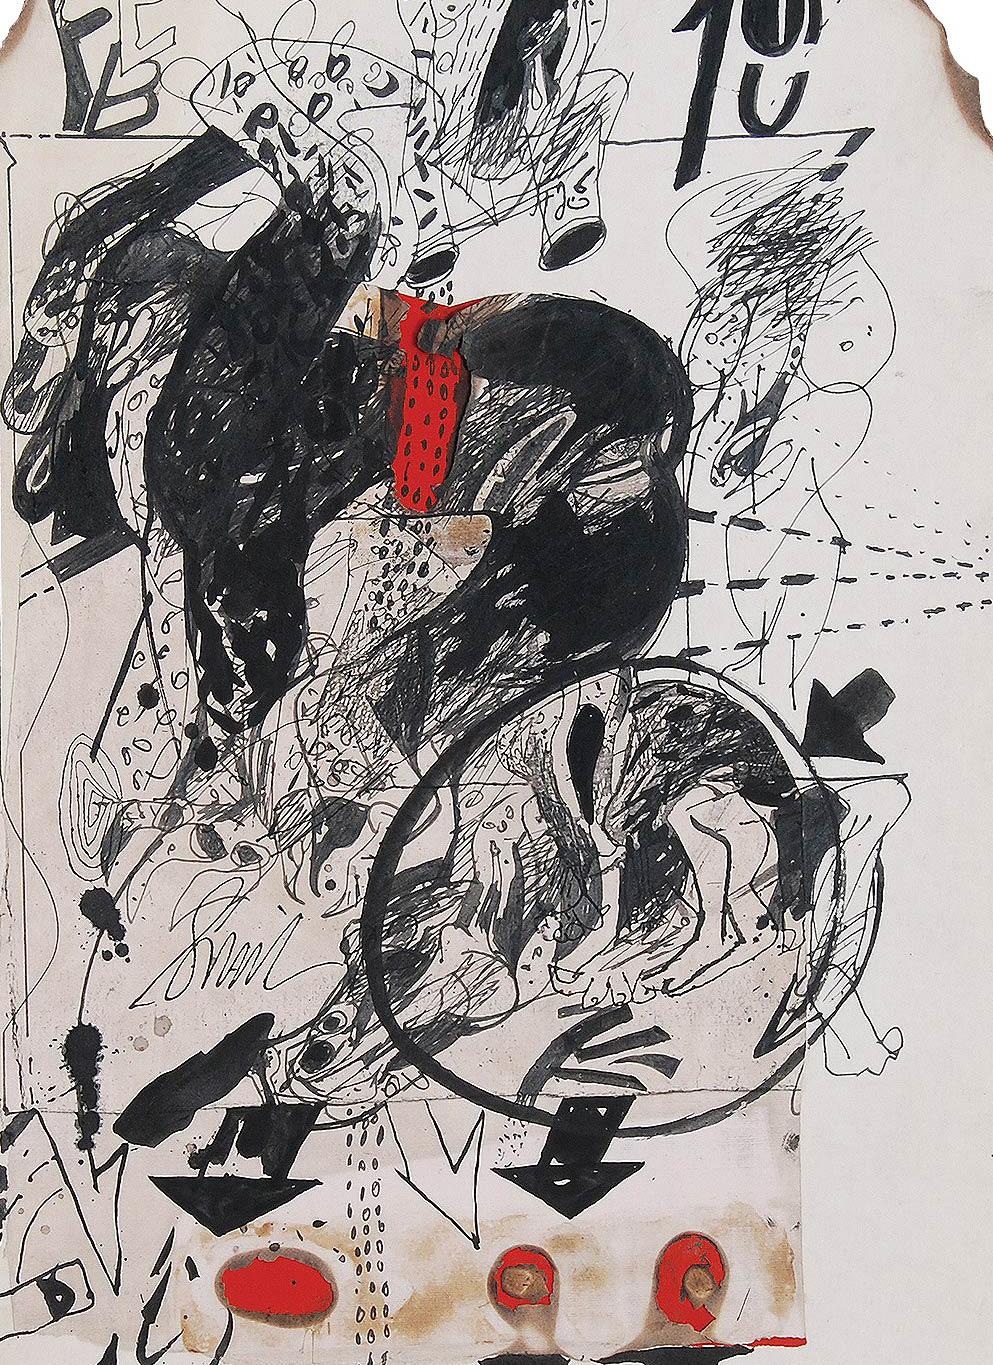 Collage based Drawings, Bull, Mixed Media on Board, Red, Black 